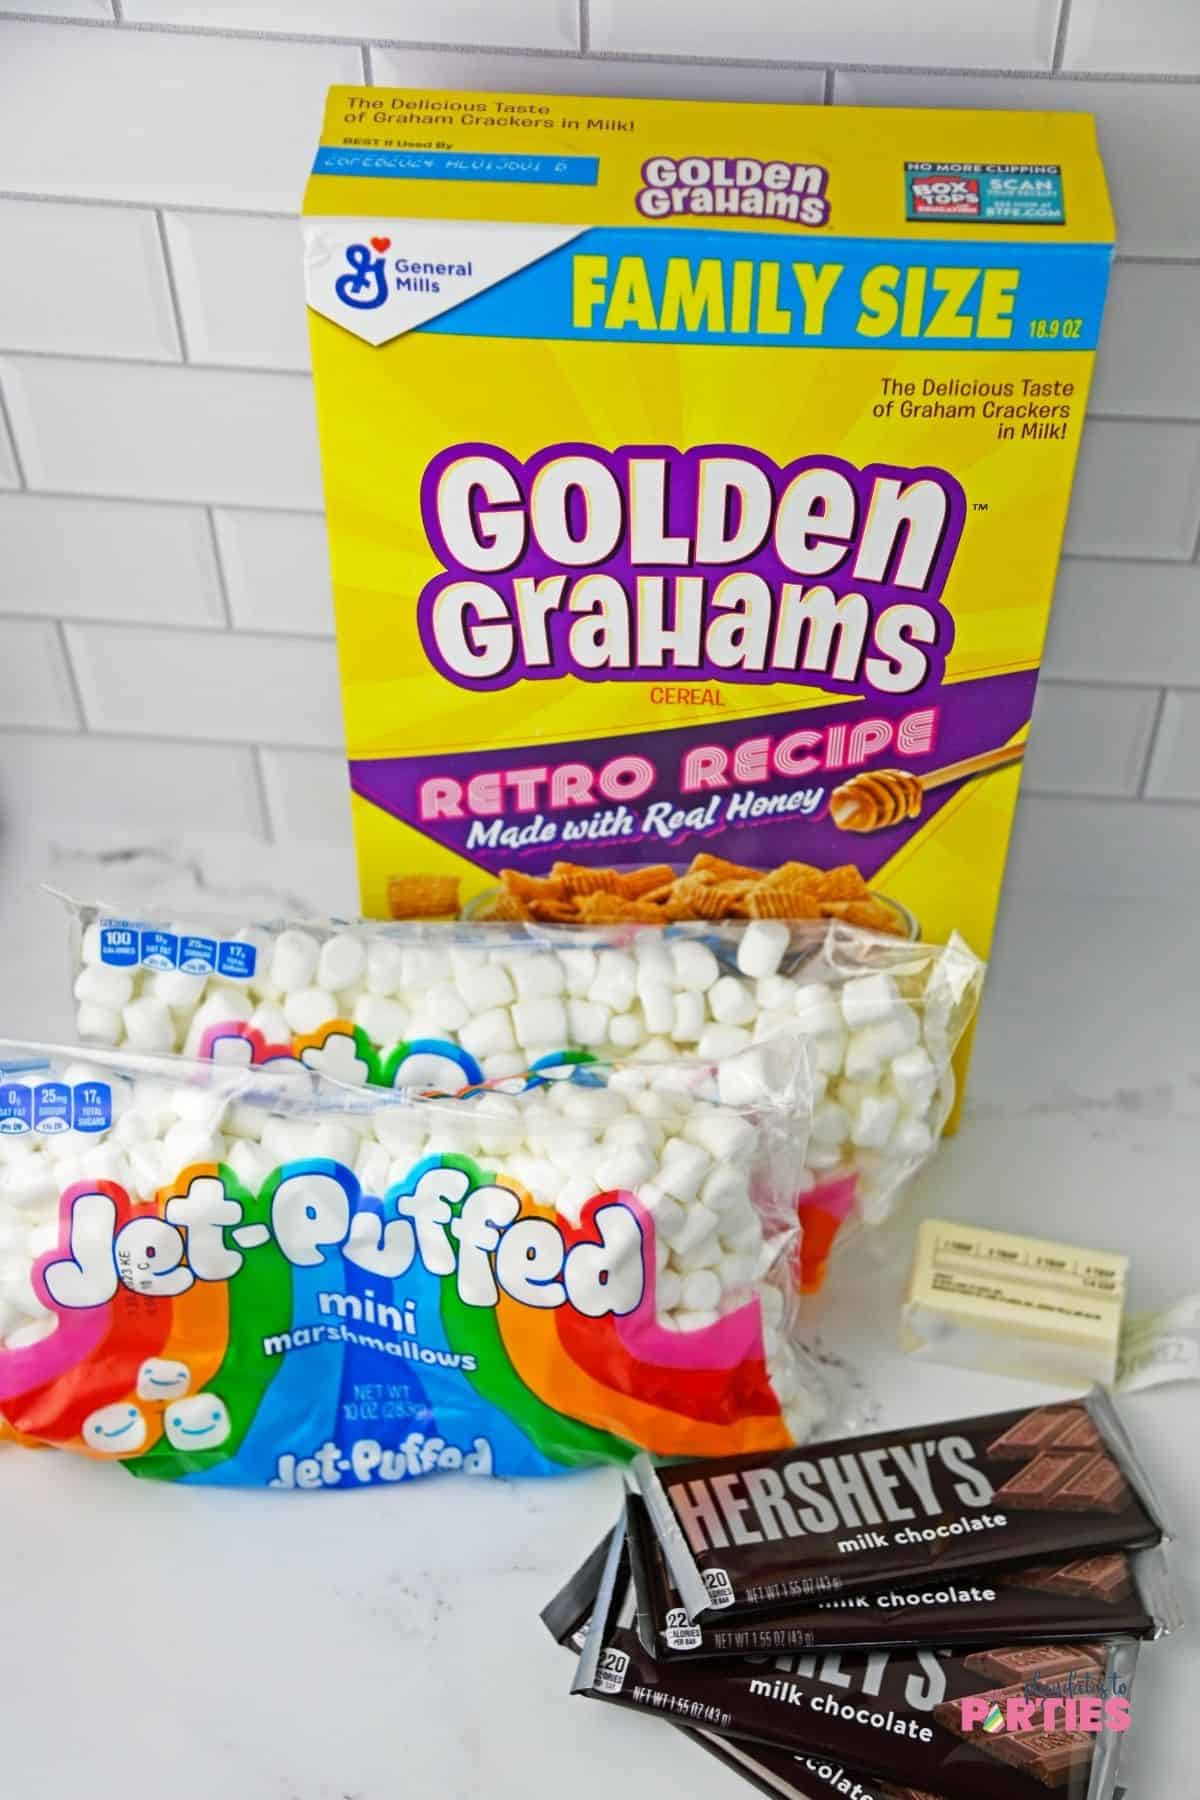 Ingredients include Golden Grahams, marshmallows, butter, and chocolate bars.